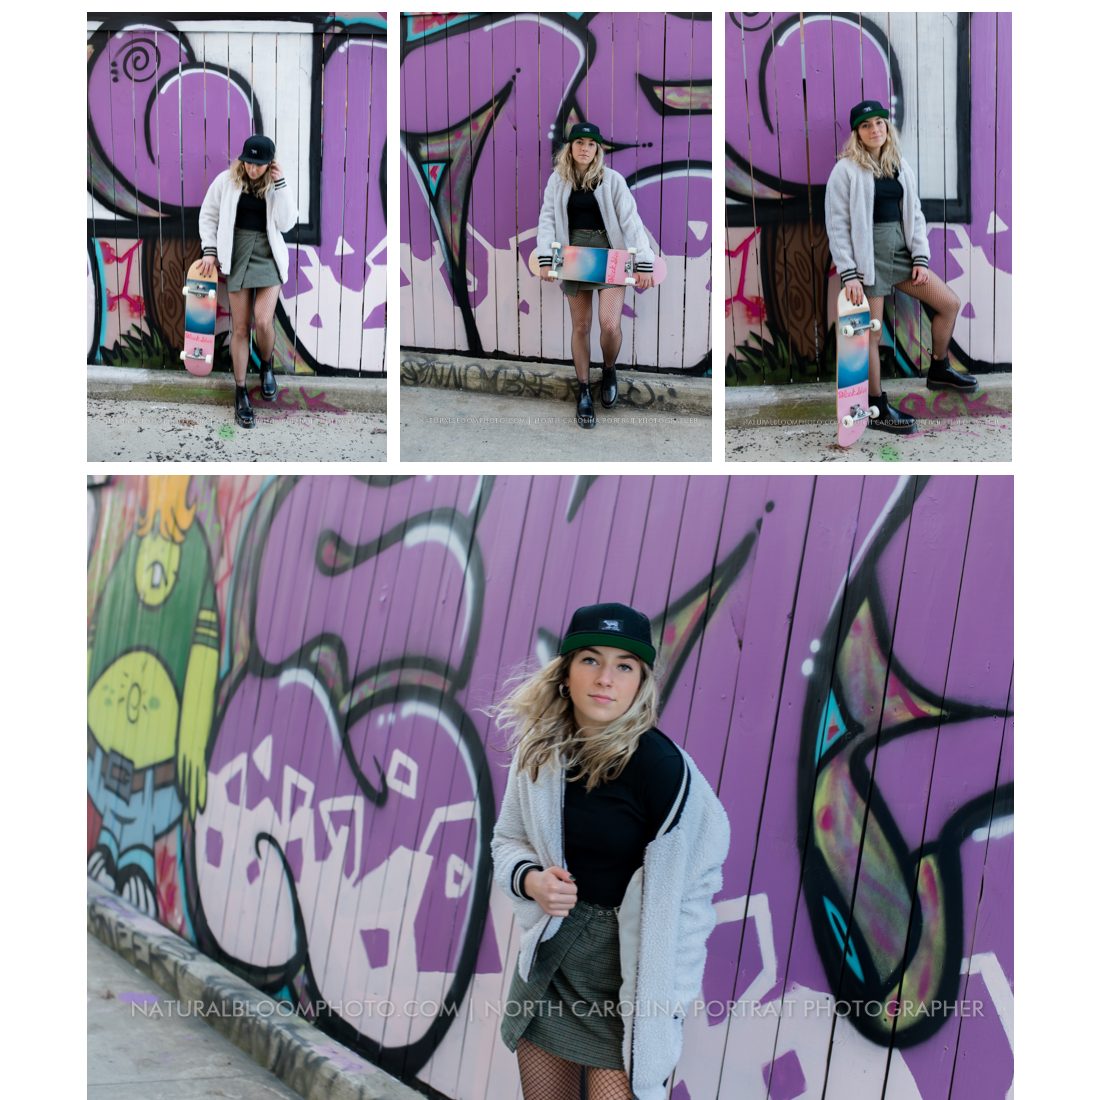 Grunge skater girl senior pictures in skate shop, record store, and graffiti wall in Uptown Charlotte North Carolina